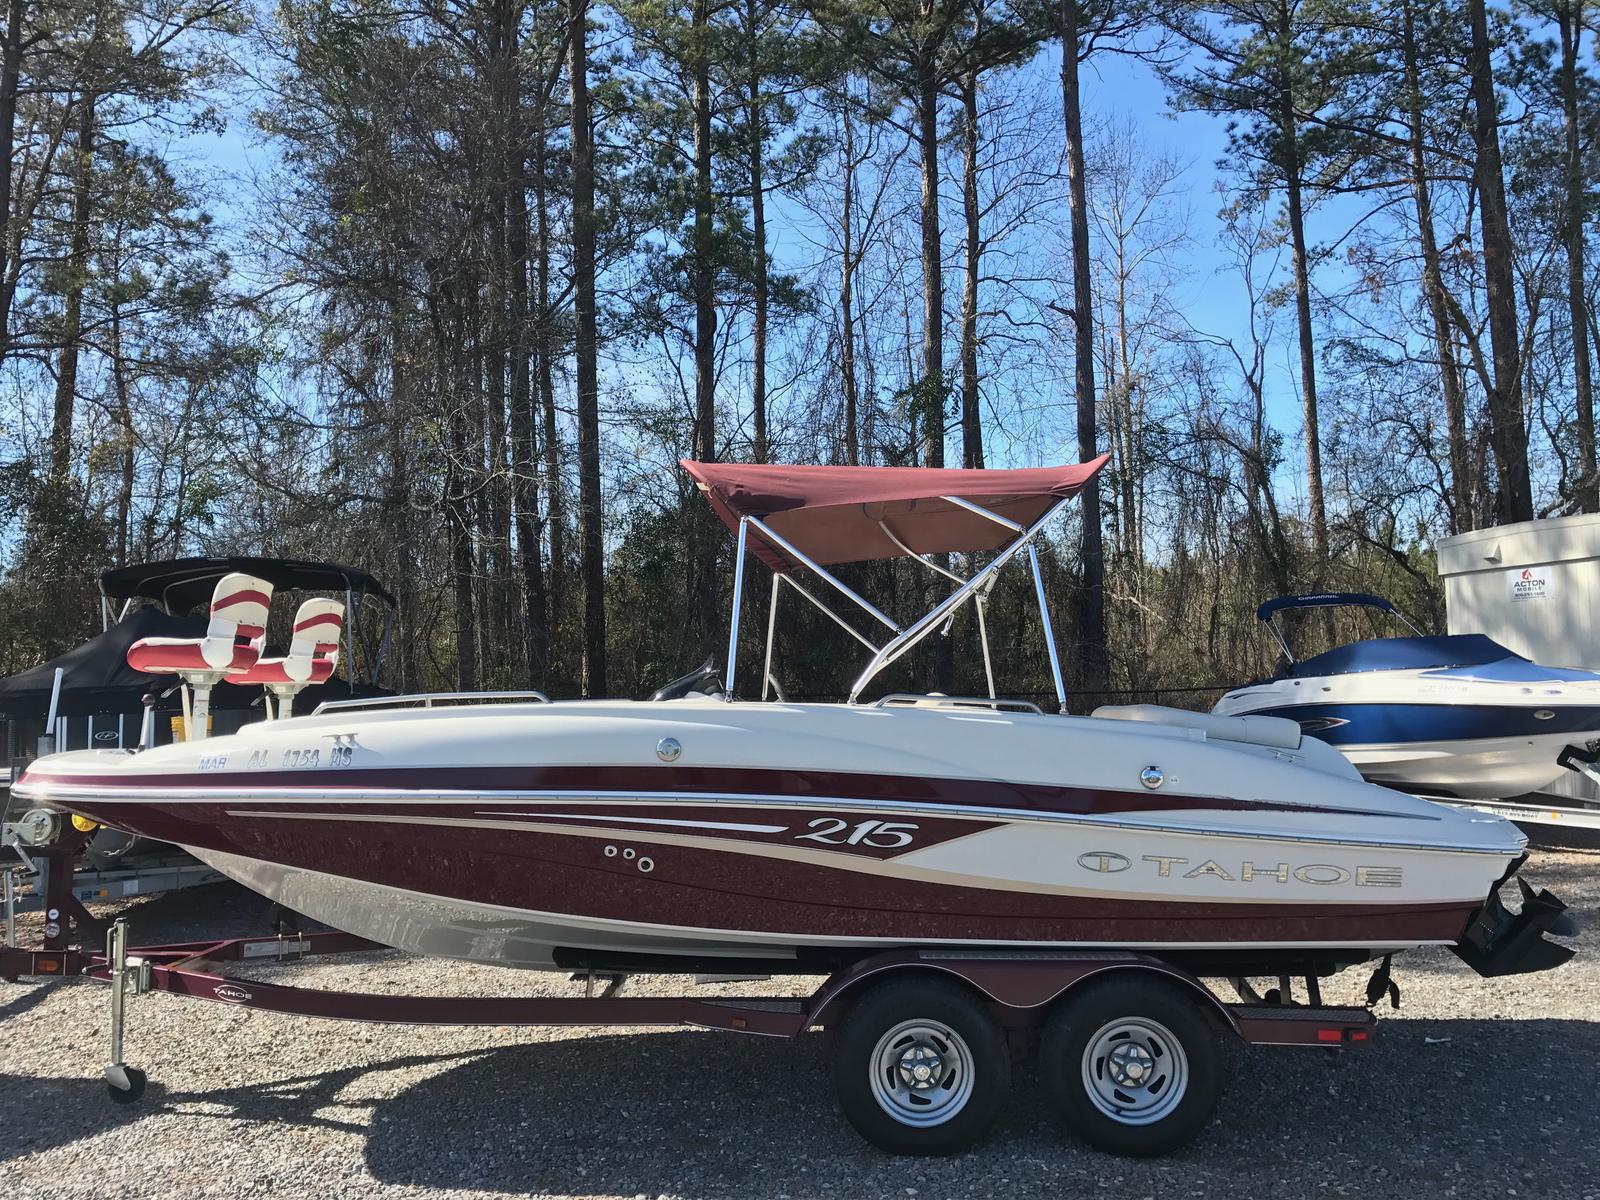 Tahoe | New and Used Boats for Sale in AL